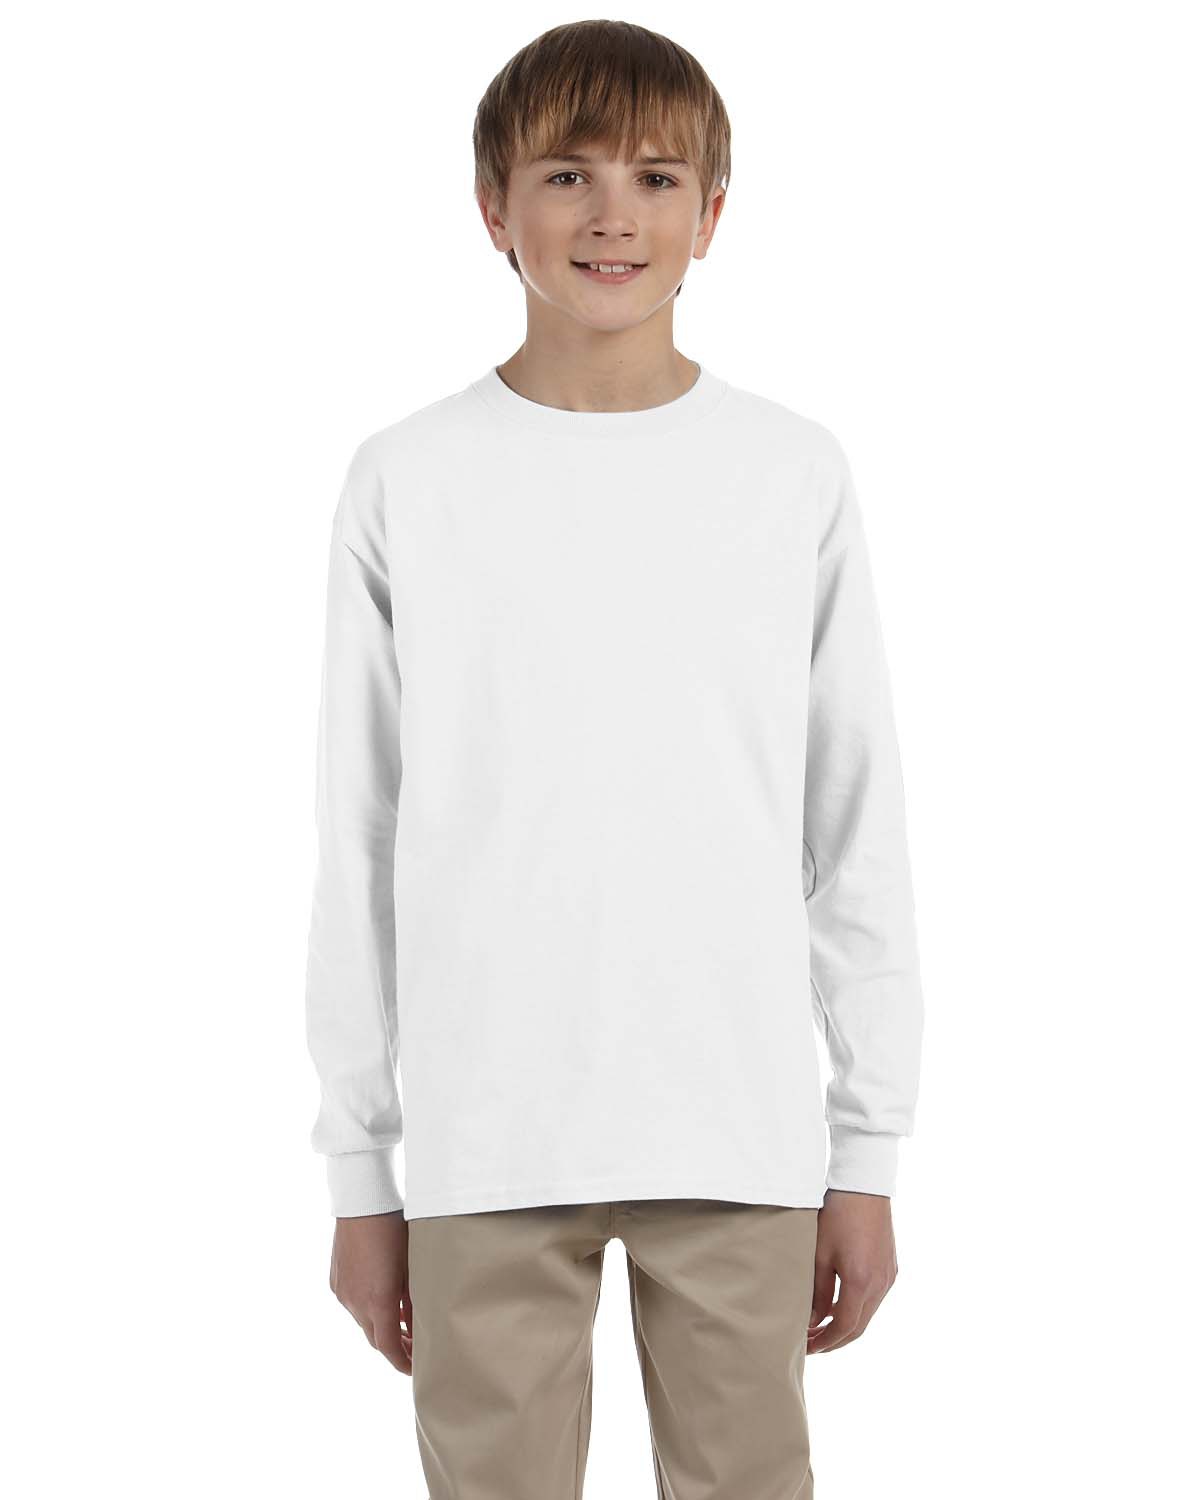 Jerzees 29BL | Youth Dri-Power ® Active 50/50 Cotton/Poly Long Sleeve T ...